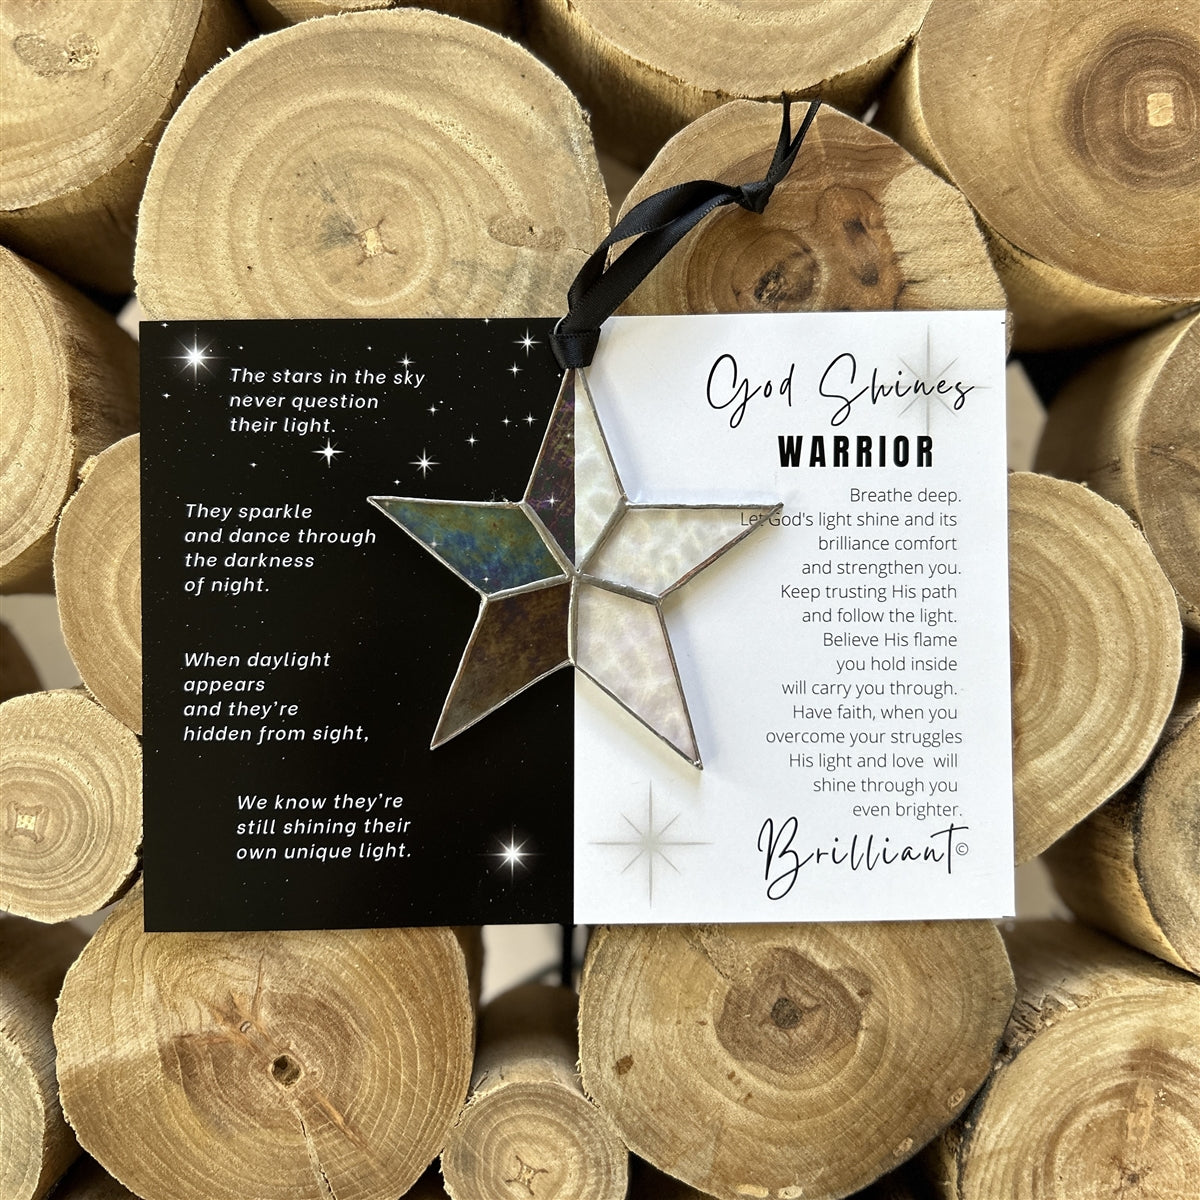 Warrior star and artwork with the &quot;God Shines&quot; poem on the left side and the &quot;Warrior&quot; sentiment on the right side.